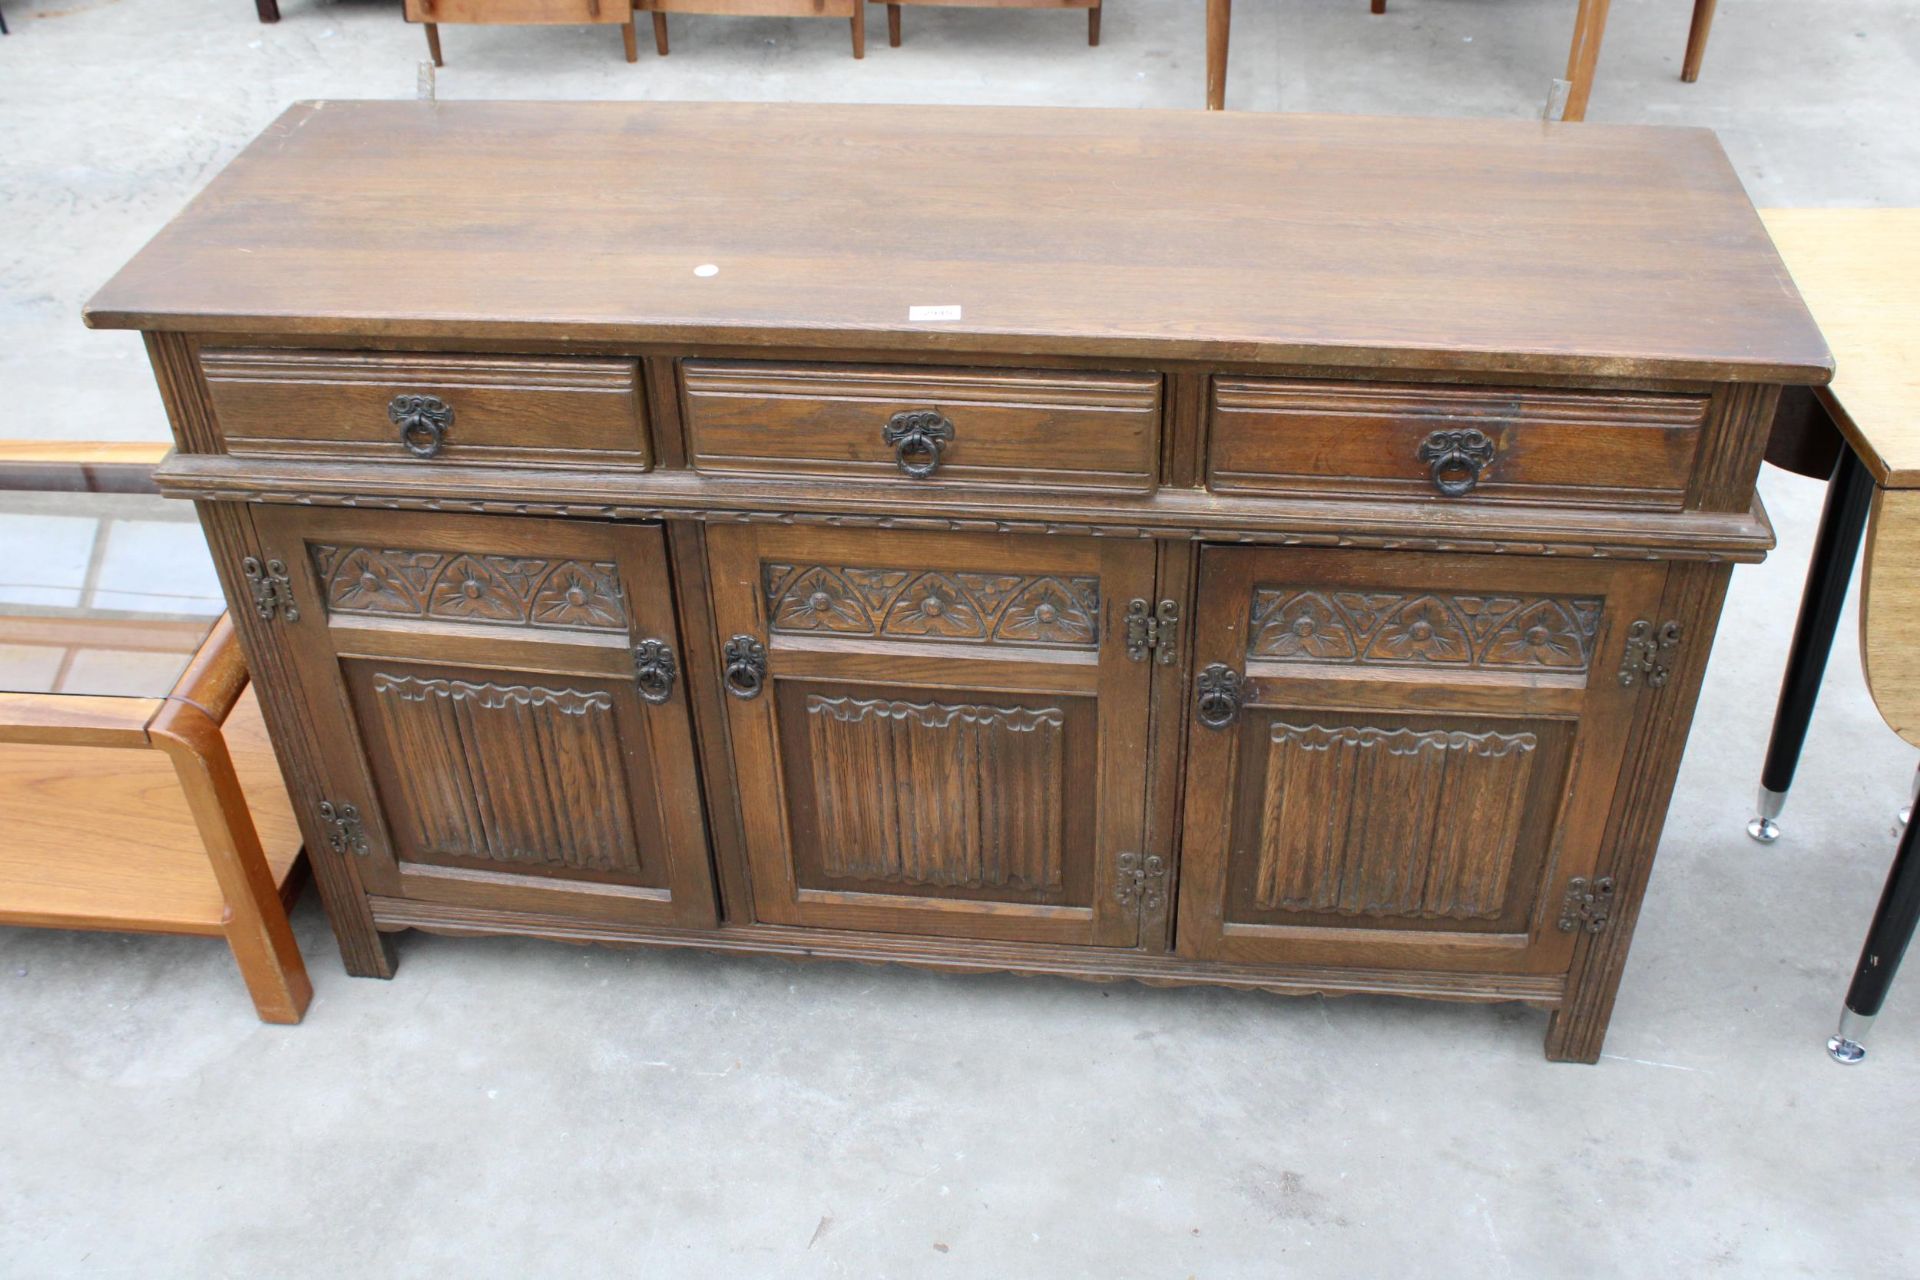 A REPRODUCTION OAK DRESSER WITH THREE LINENFOLD DOORS AND THREE DRAWERS, 54" WIDE